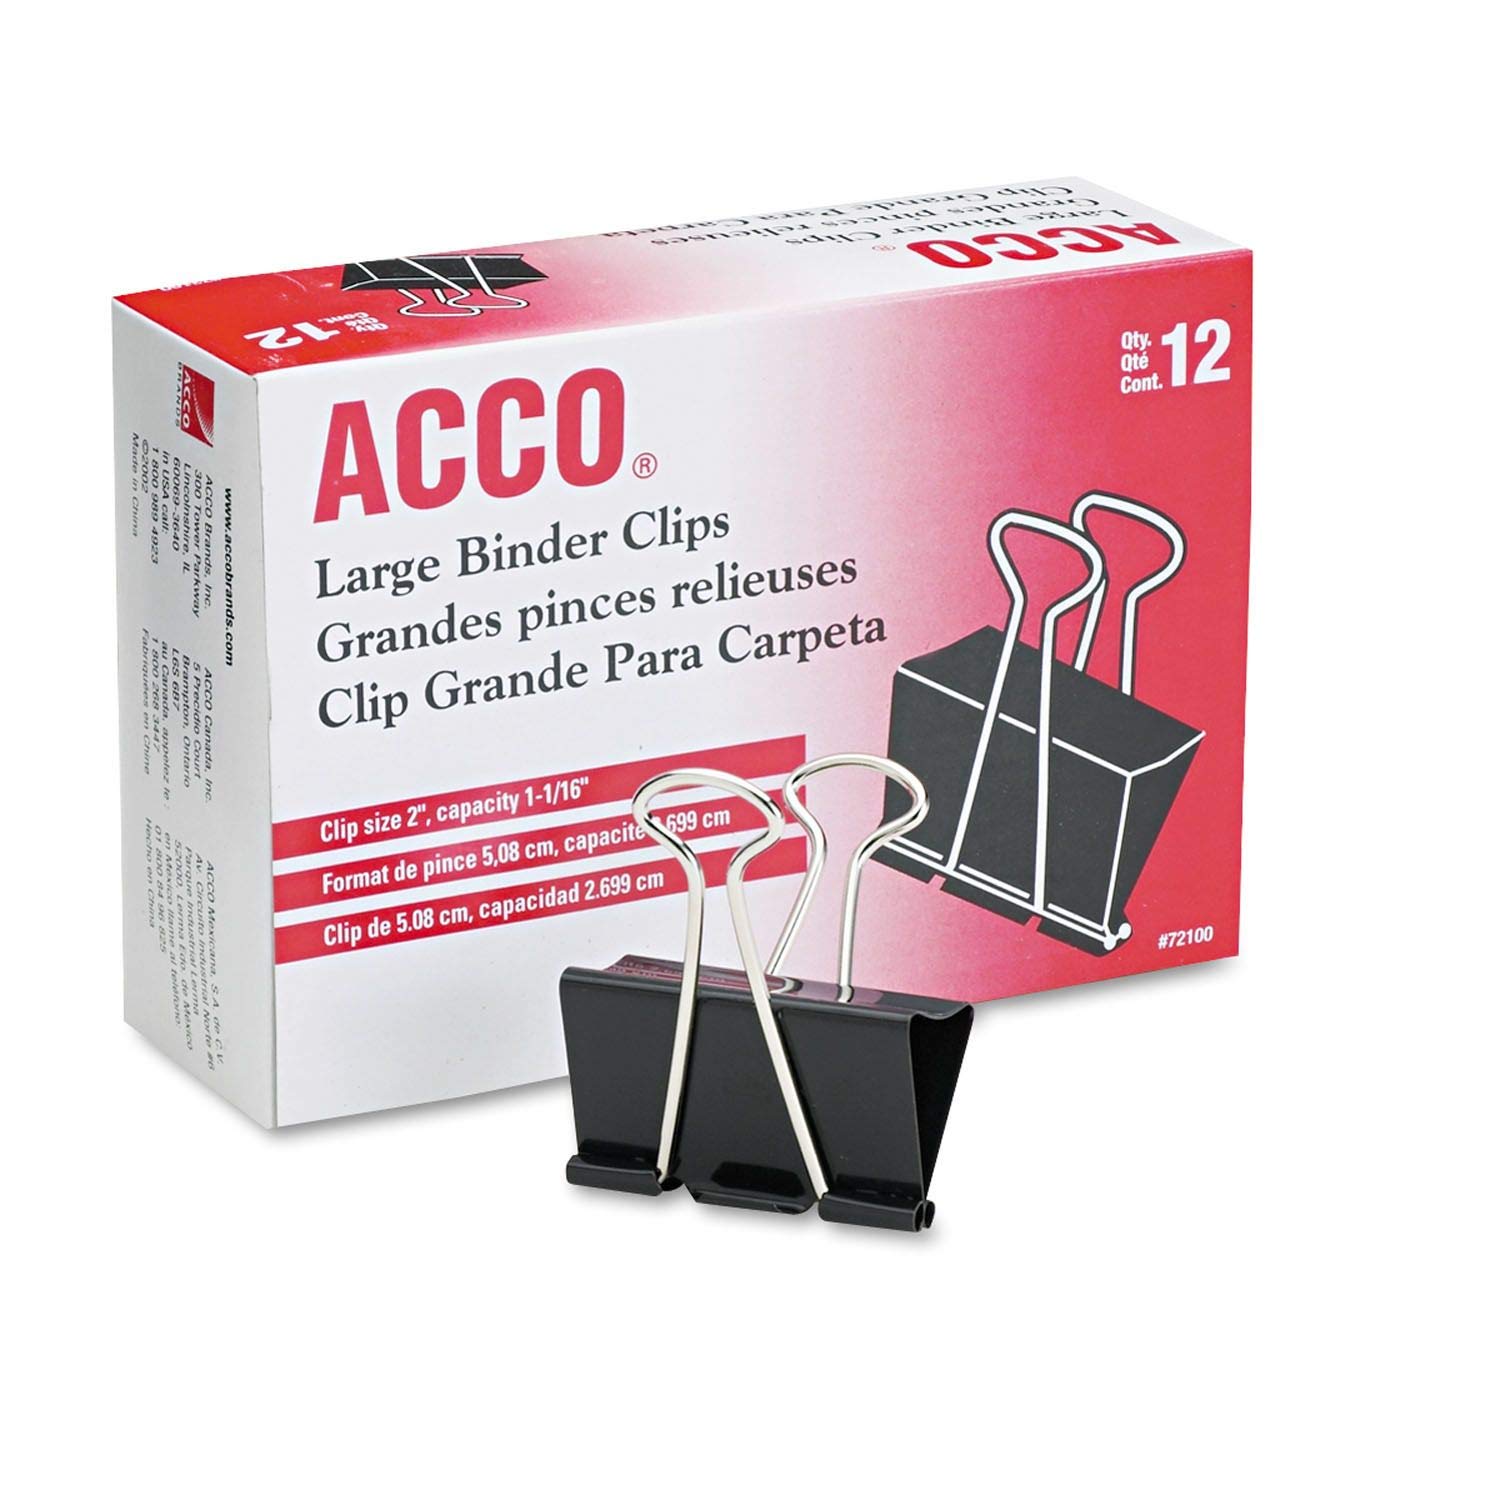 ACCO Brands ACCO Binder Clips, Large, 2 Boxes, 12 Clips...